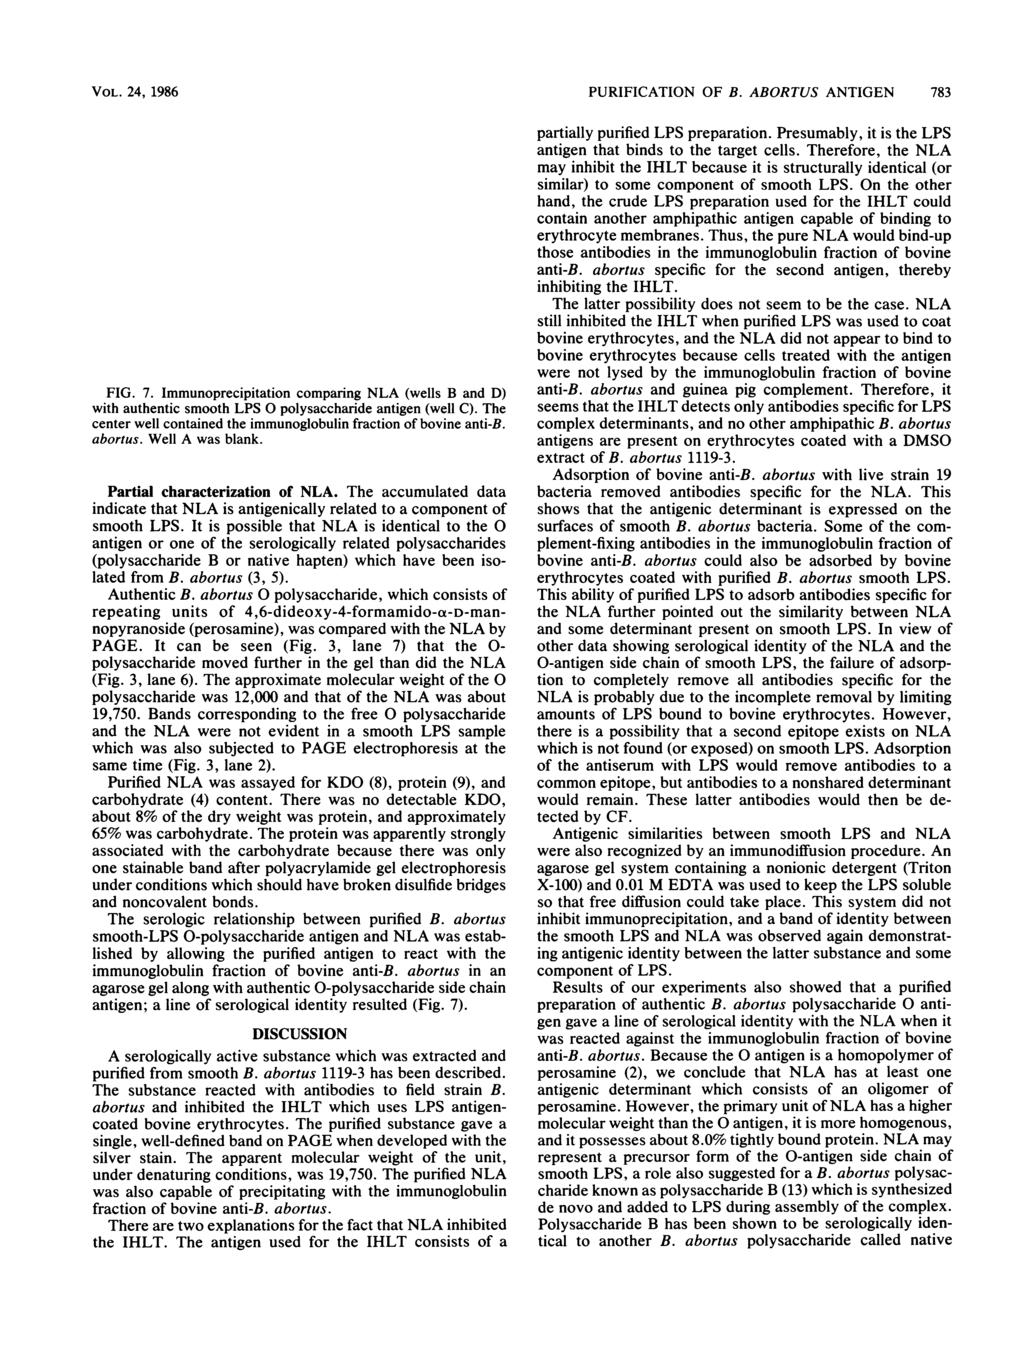 VOL. 24, 1986 D.." ci I.. FIG. 7. Immunoprecipitation comparing NLA (wells B and D) with authentic smooth LPS 0 polysaccharide antigen (well C).